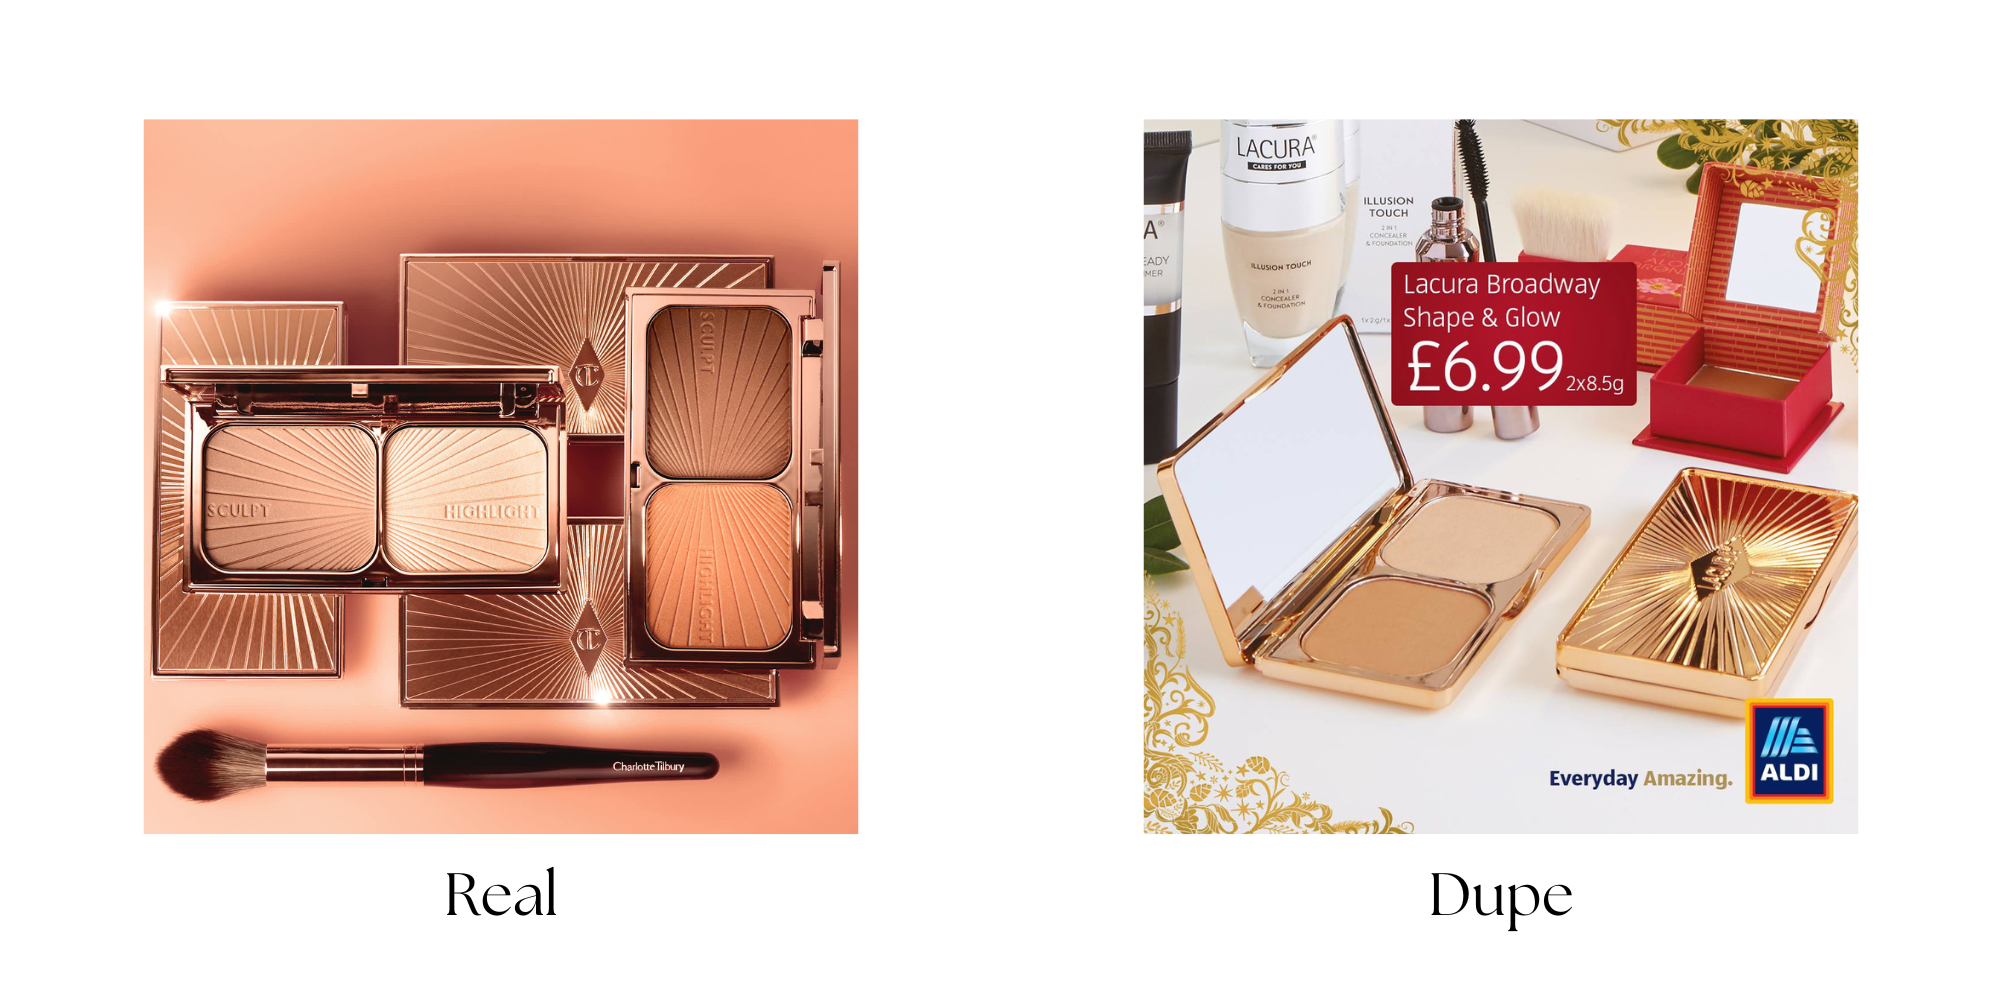 Charlotte Tilbury Fimstar Bronze and Glow dupe: Lacura Broadway Shape and Glow palette